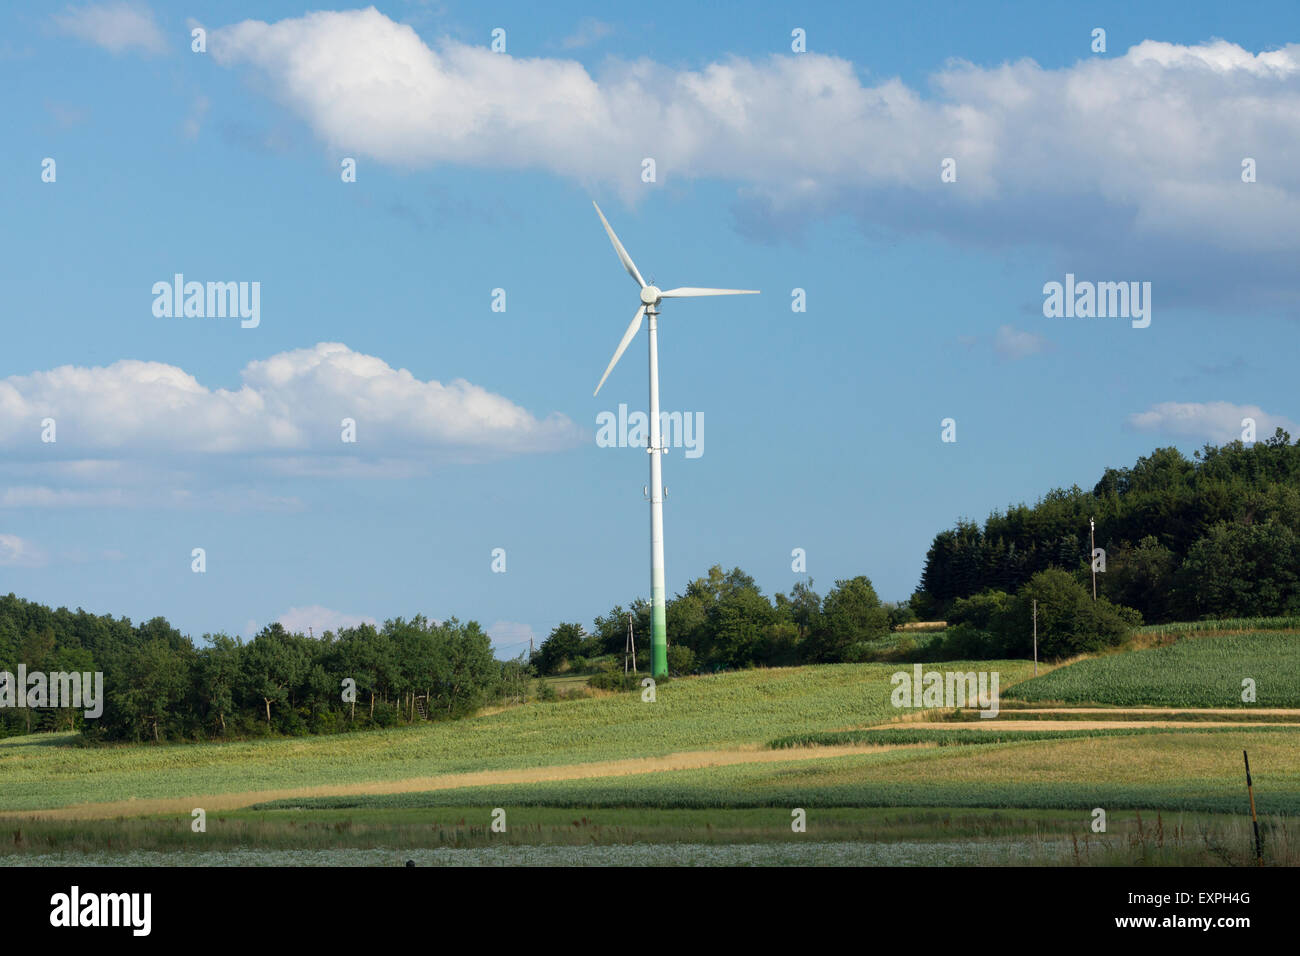 A single wind turbine in Lower Austria, Europe. Theme: renewable energy, green energy, wind energy, sustainable, non-polluting, electricity generation Stock Photo